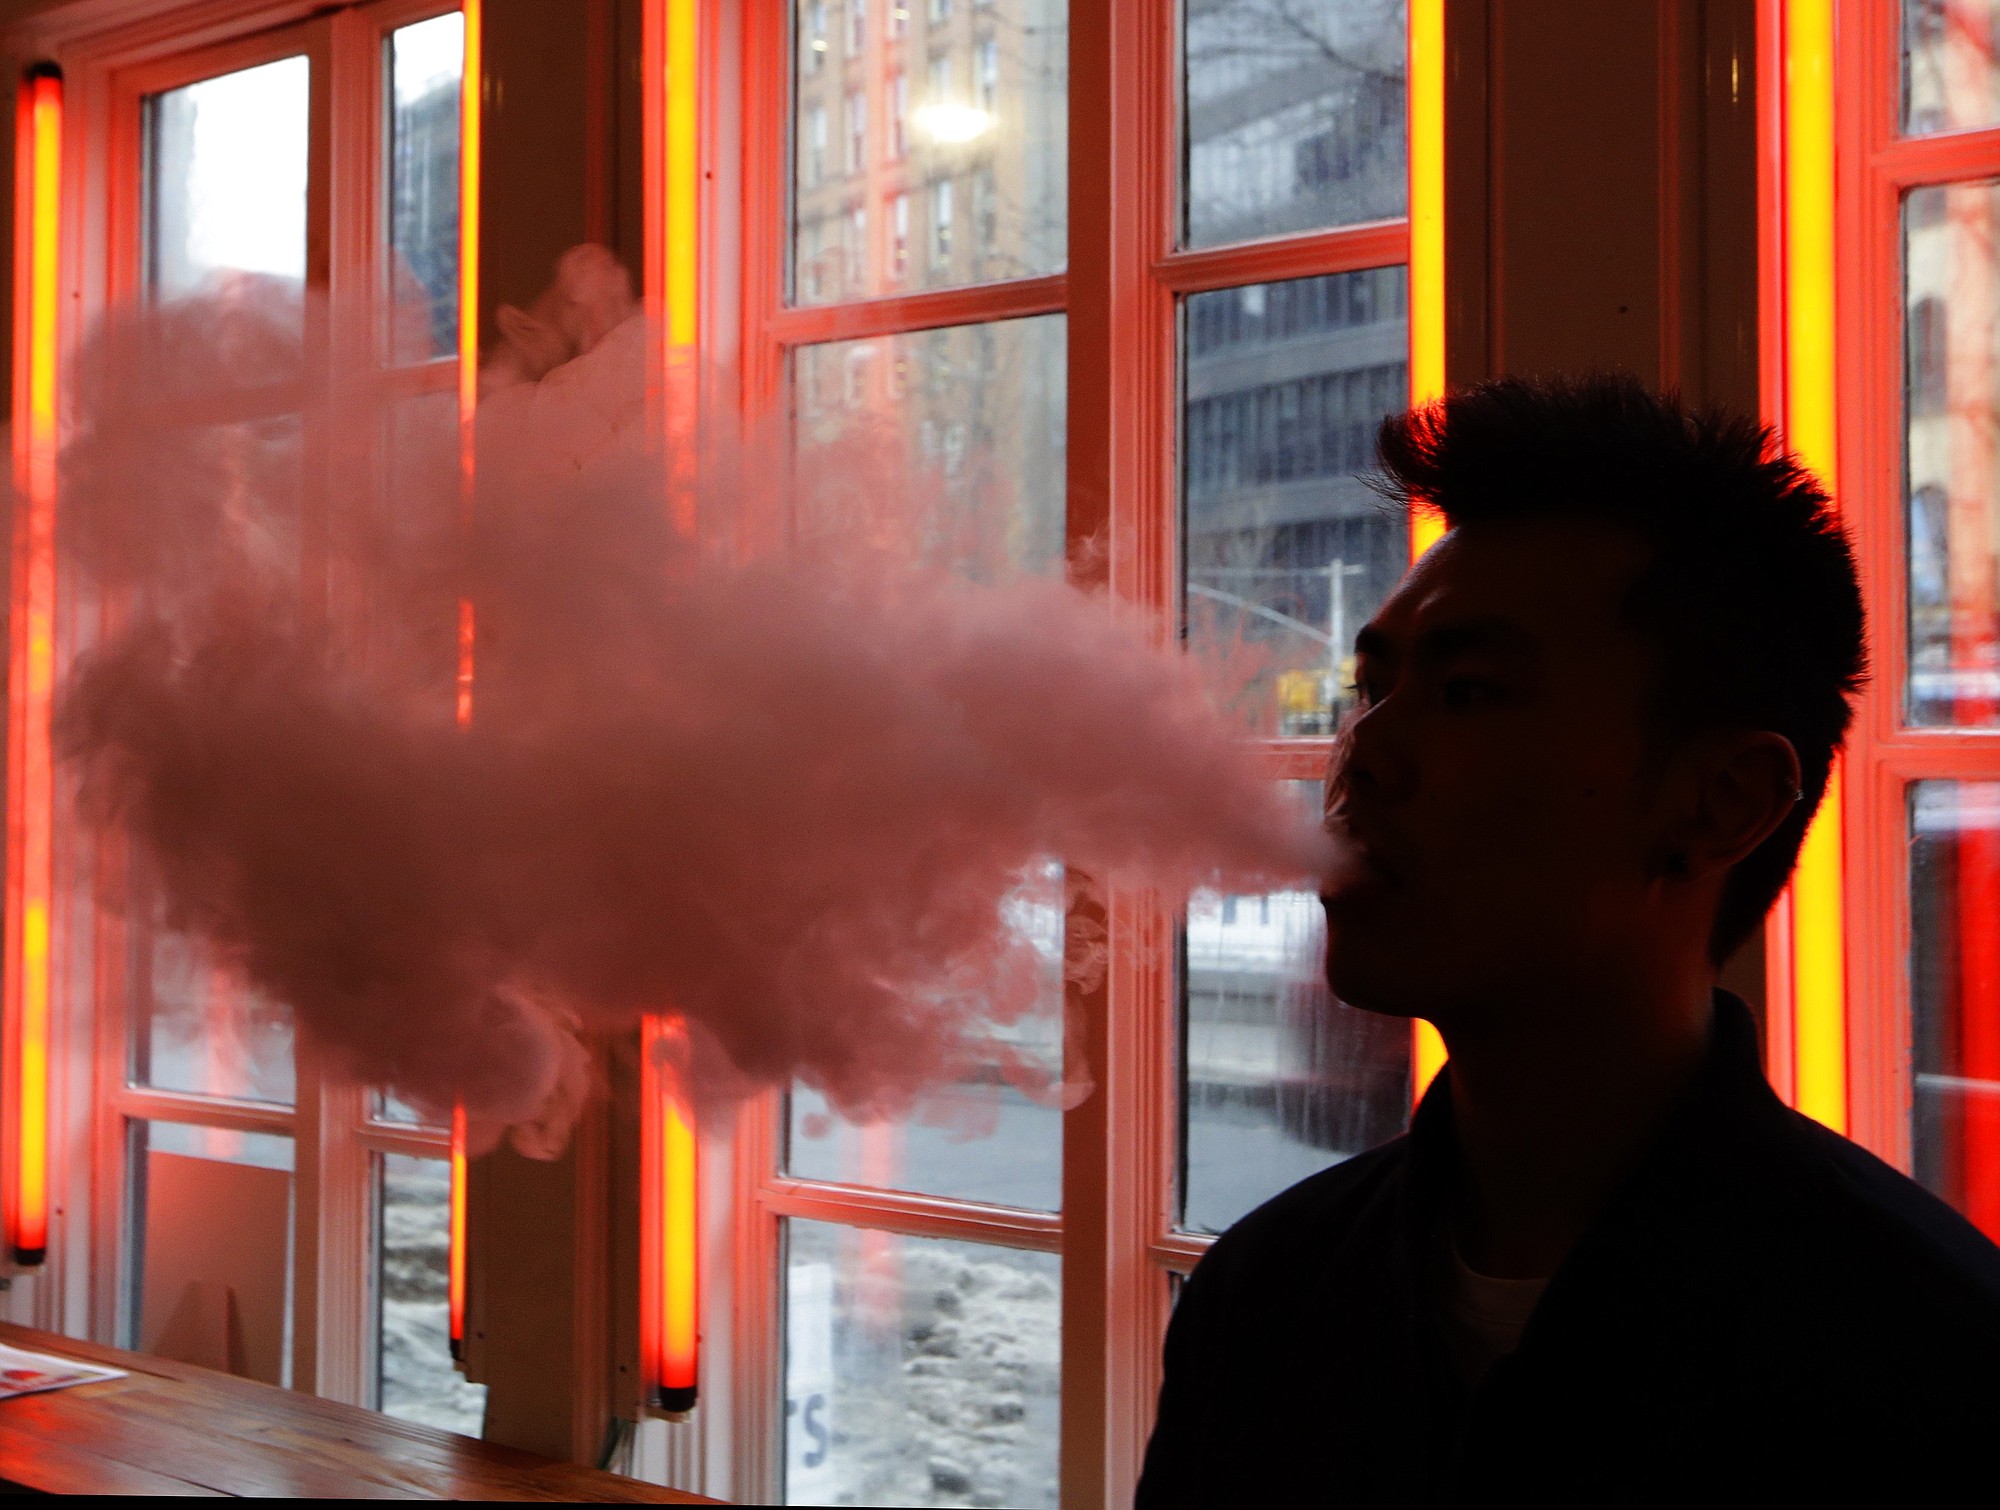 A man exhales vapor from an e-cigarette in New York.